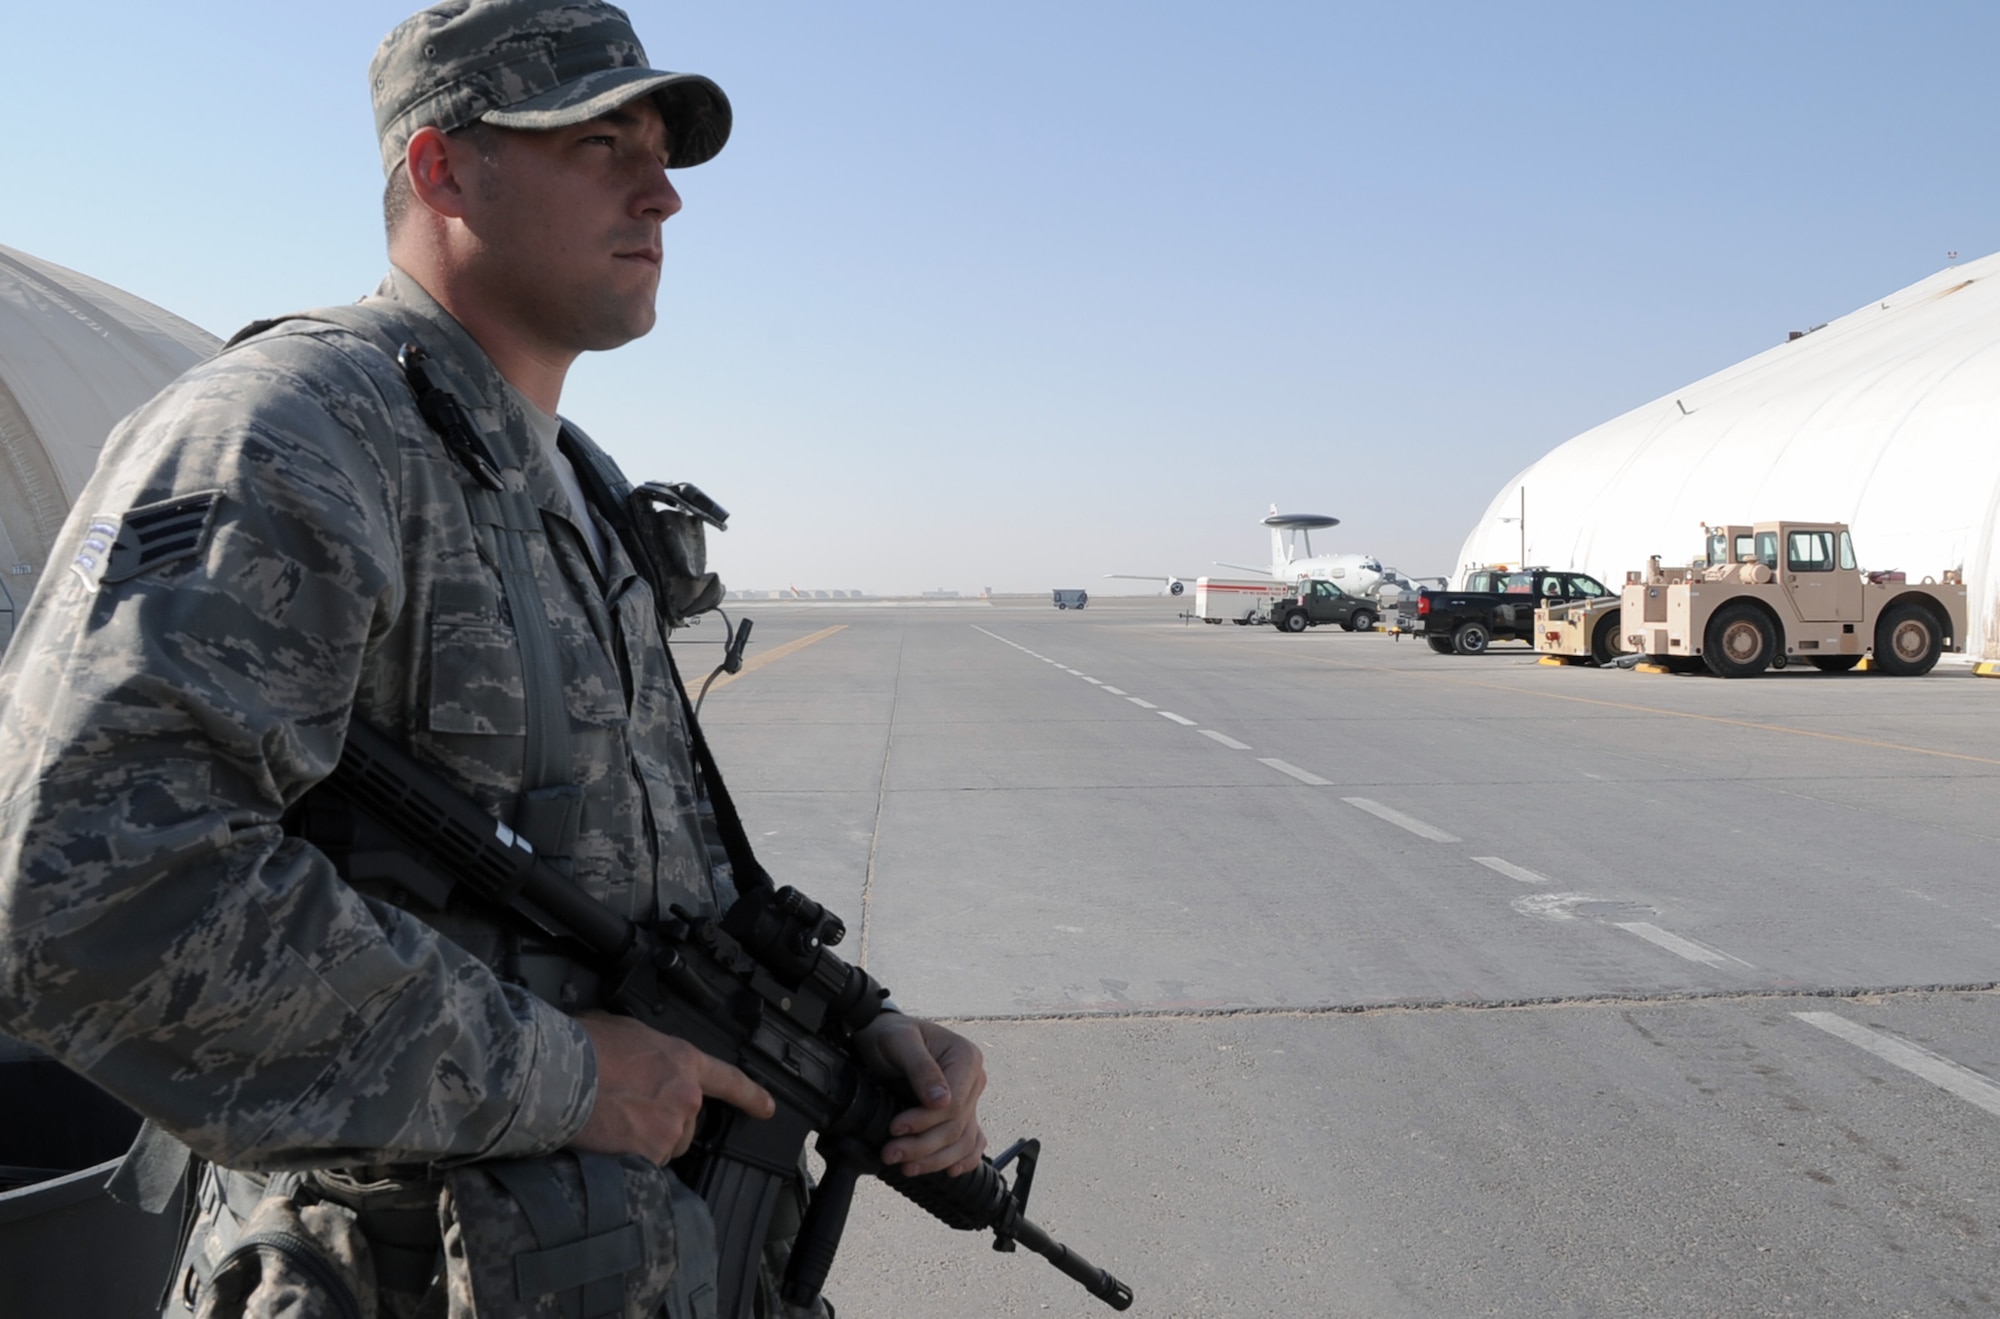 Senior Airman James Assett, security forces journeyman with the 380th Expeditionary Security Forces Squadron at a non-disclosed base in Southwest Asia, watches over a checkpoint during operations near the flightline Jan. 22, 2010.  Airman Asseff is deployed from the 96th Security Forces Squadron at Eglin Air Force Base, Fla., and his hometown is Lorain, Ohio.  (U.S. Air Force Photo/Tech. Sgt. Scott T. Sturkol/Released)